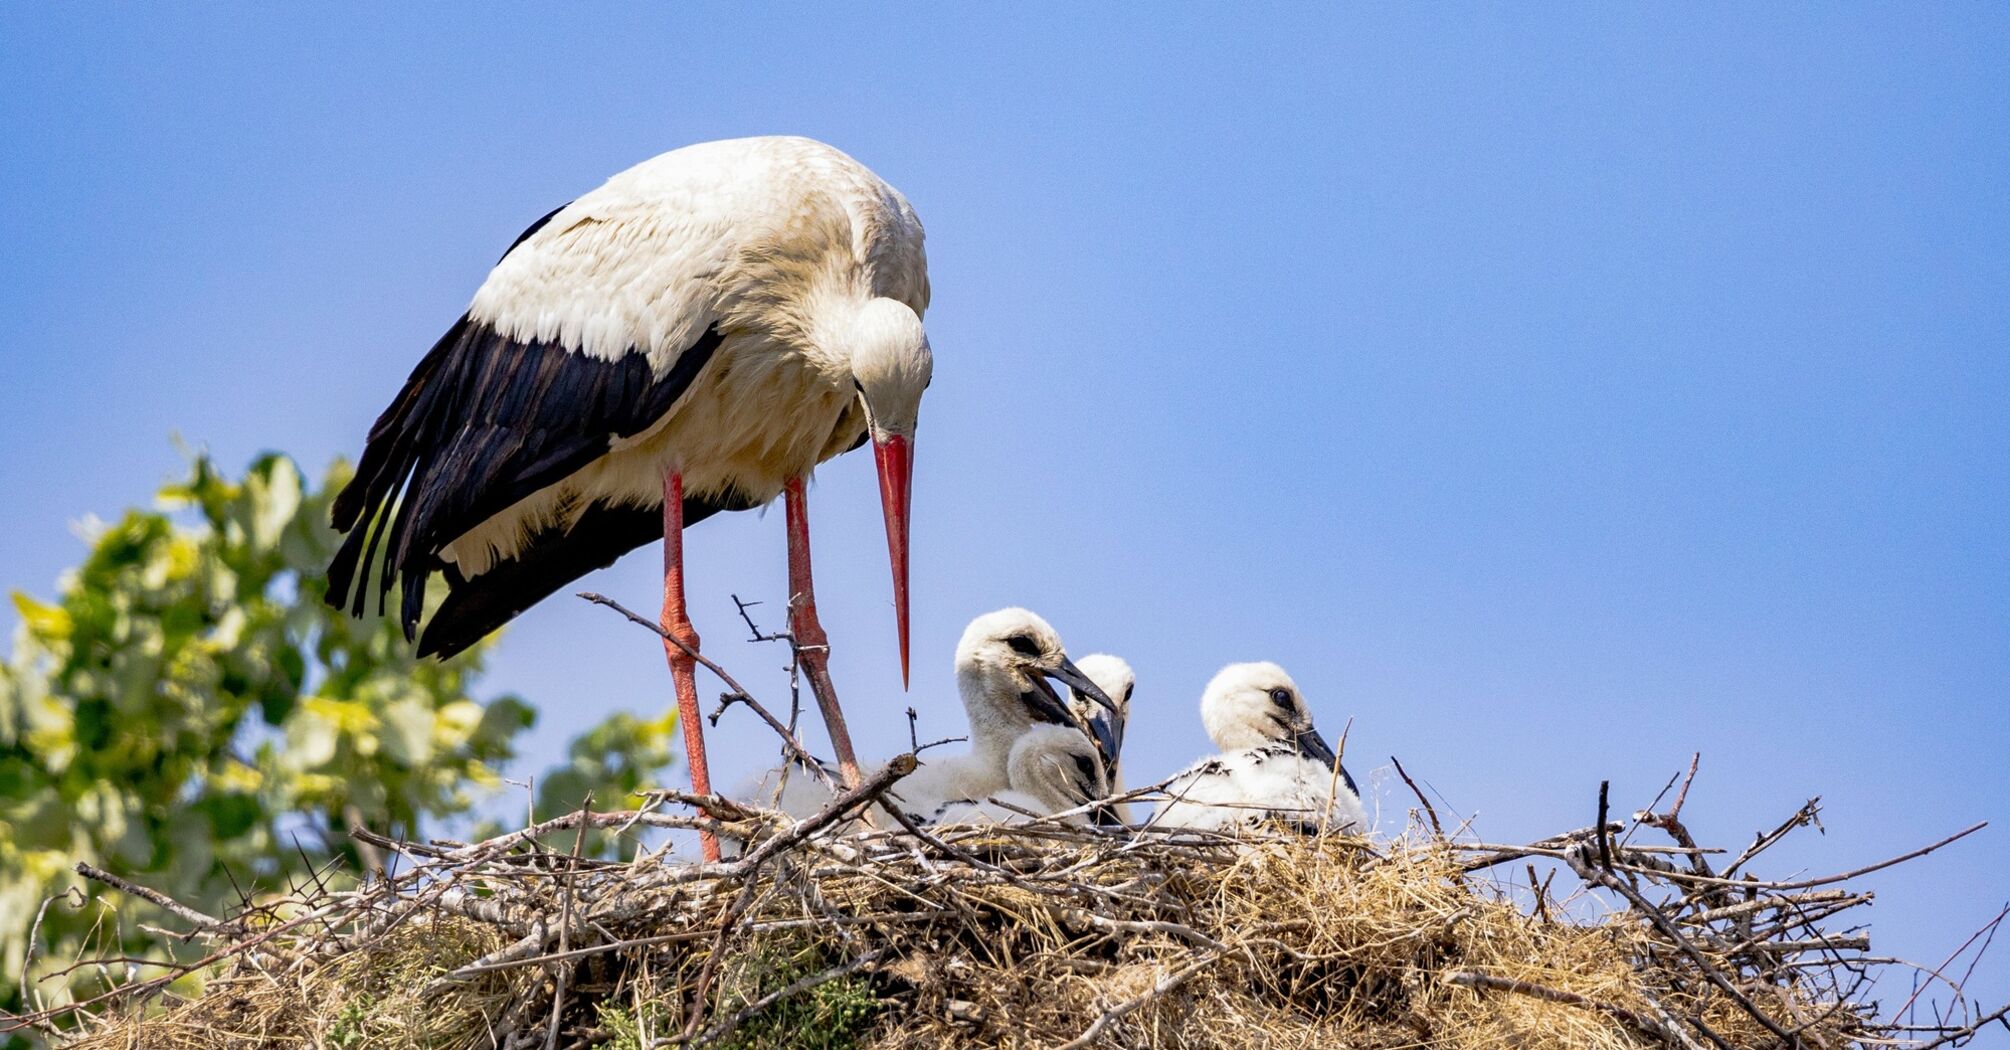 How to interpret storks presence in the yard?